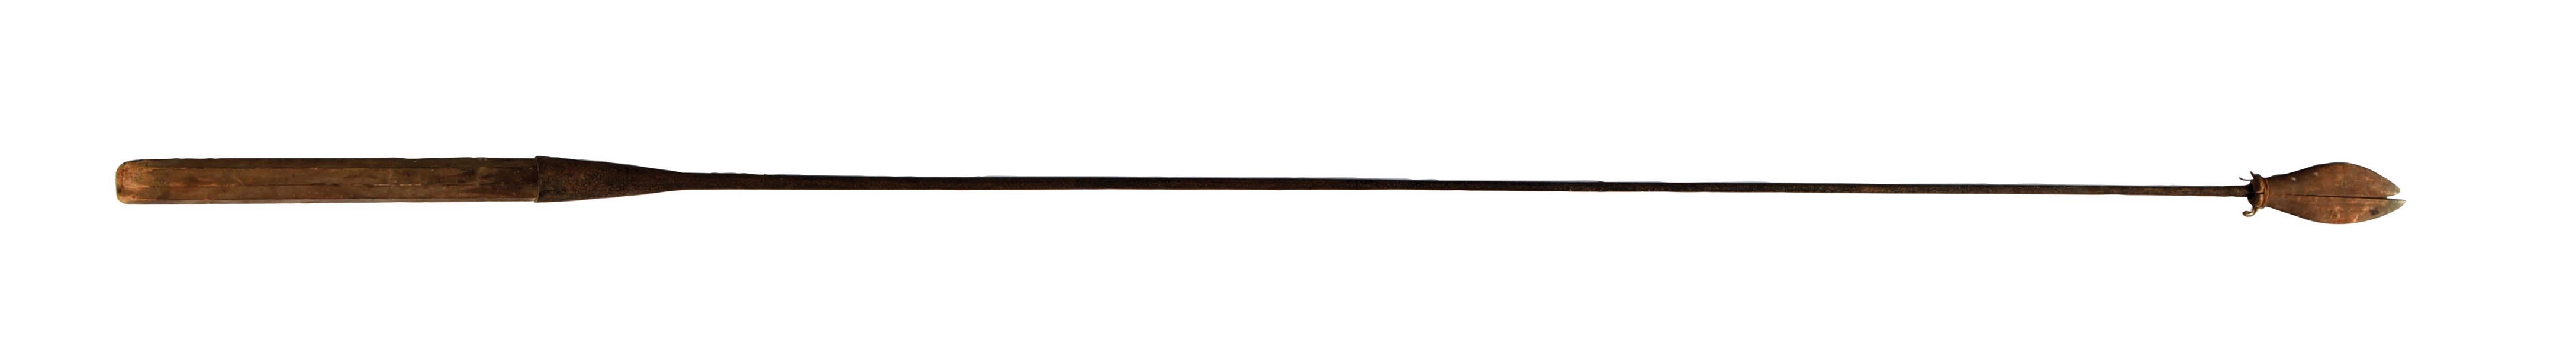 A HAND LANCE OR KILLING IRON, USED FOR WHALING, C. 19TH CENTURY.